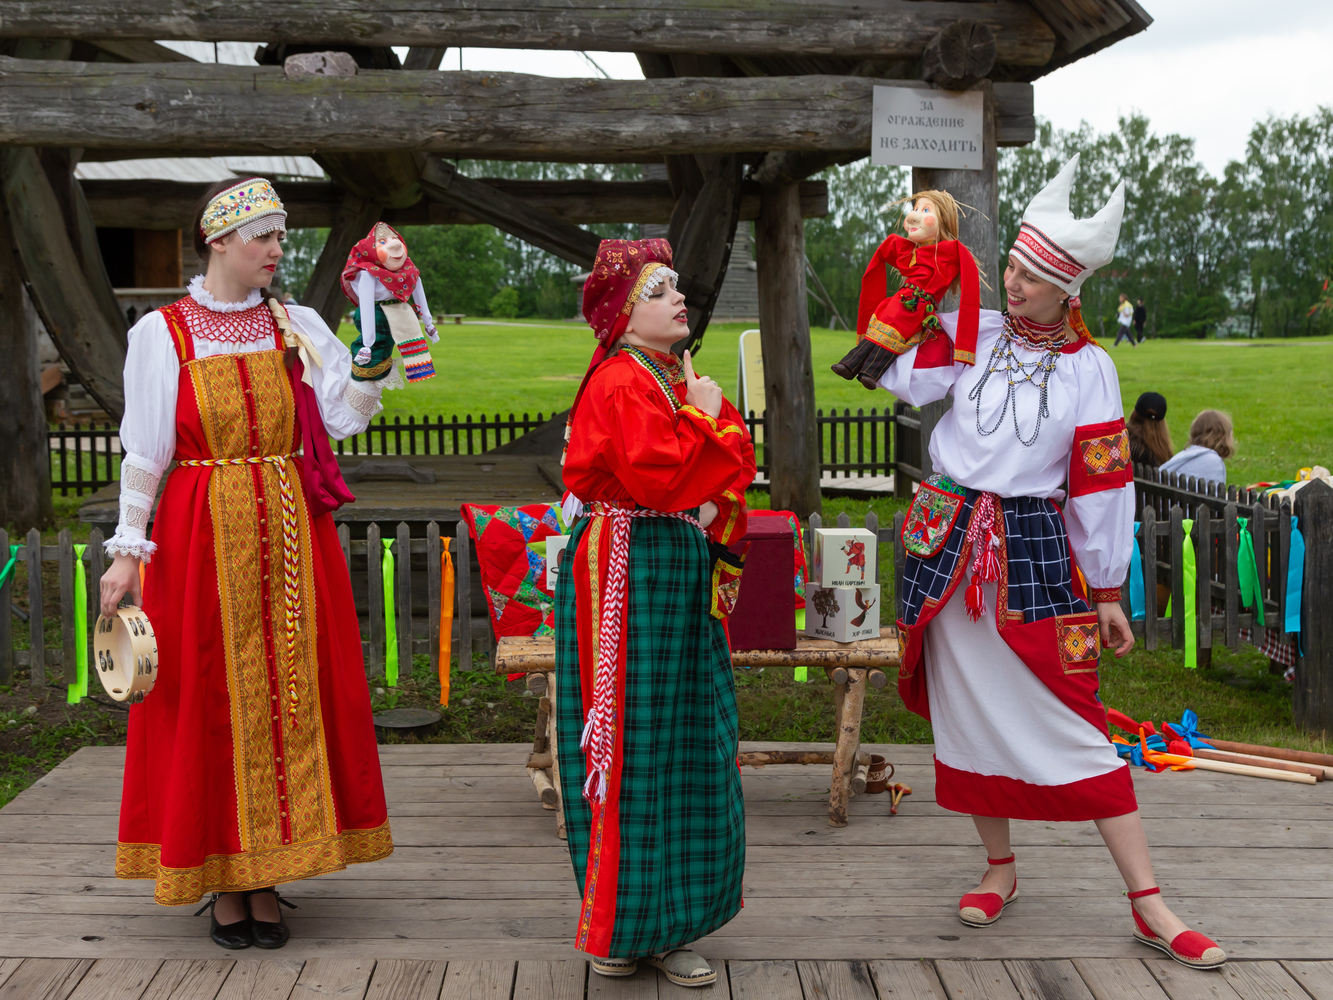 Trinity Saturday was held in the Museum of Wooden Architecture in Suzdal